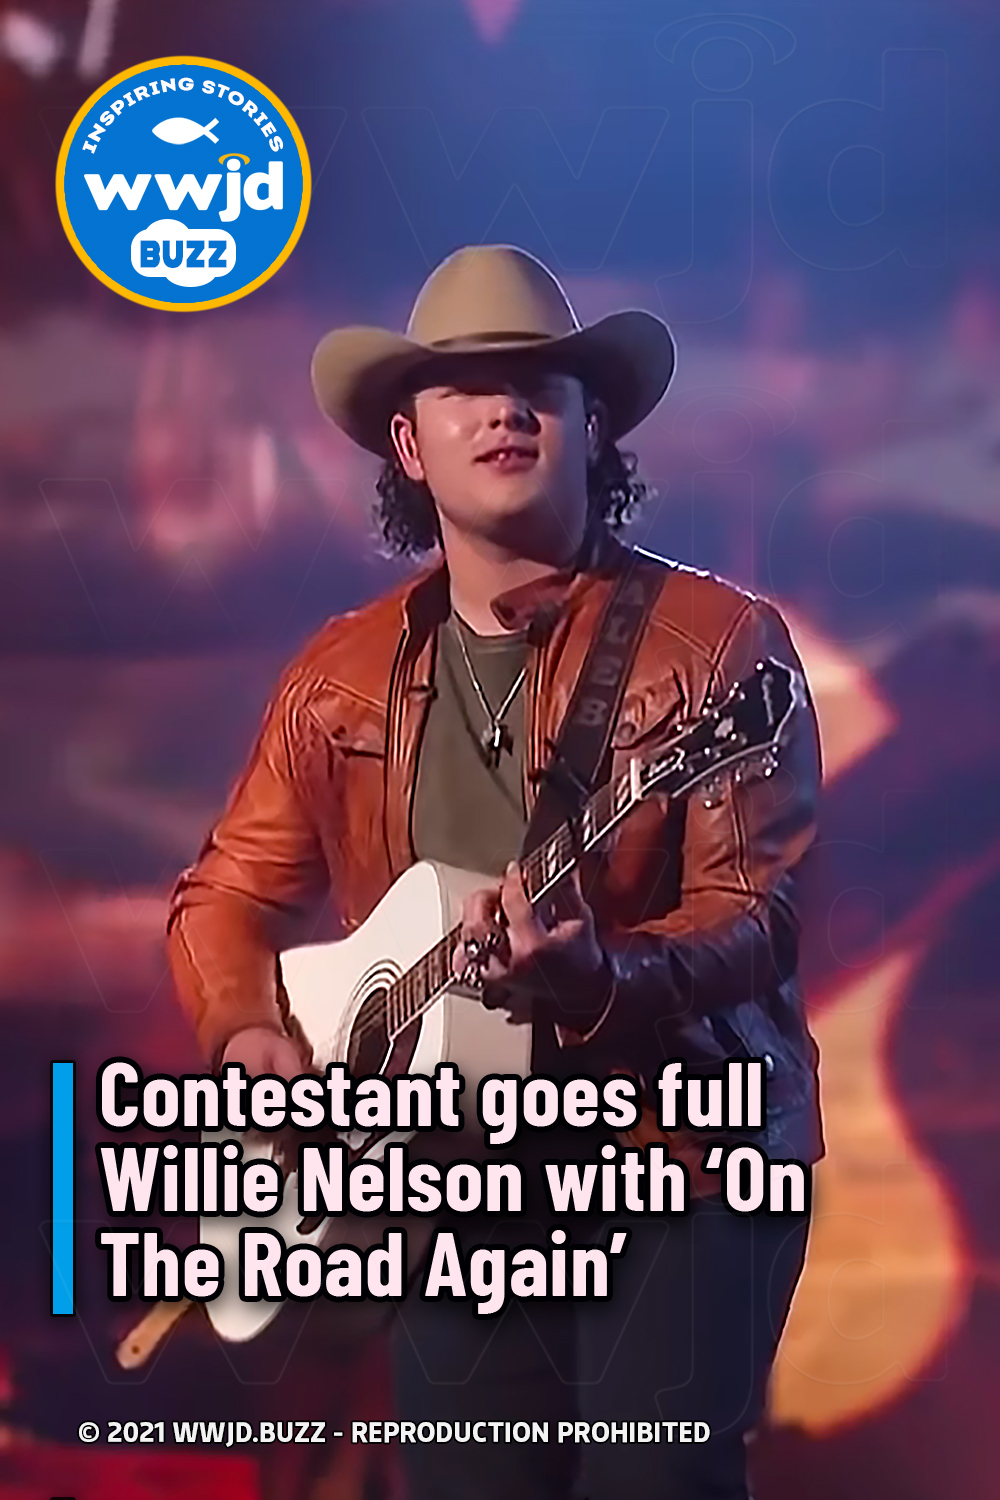 Contestant goes full Willie Nelson with ‘On The Road Again’